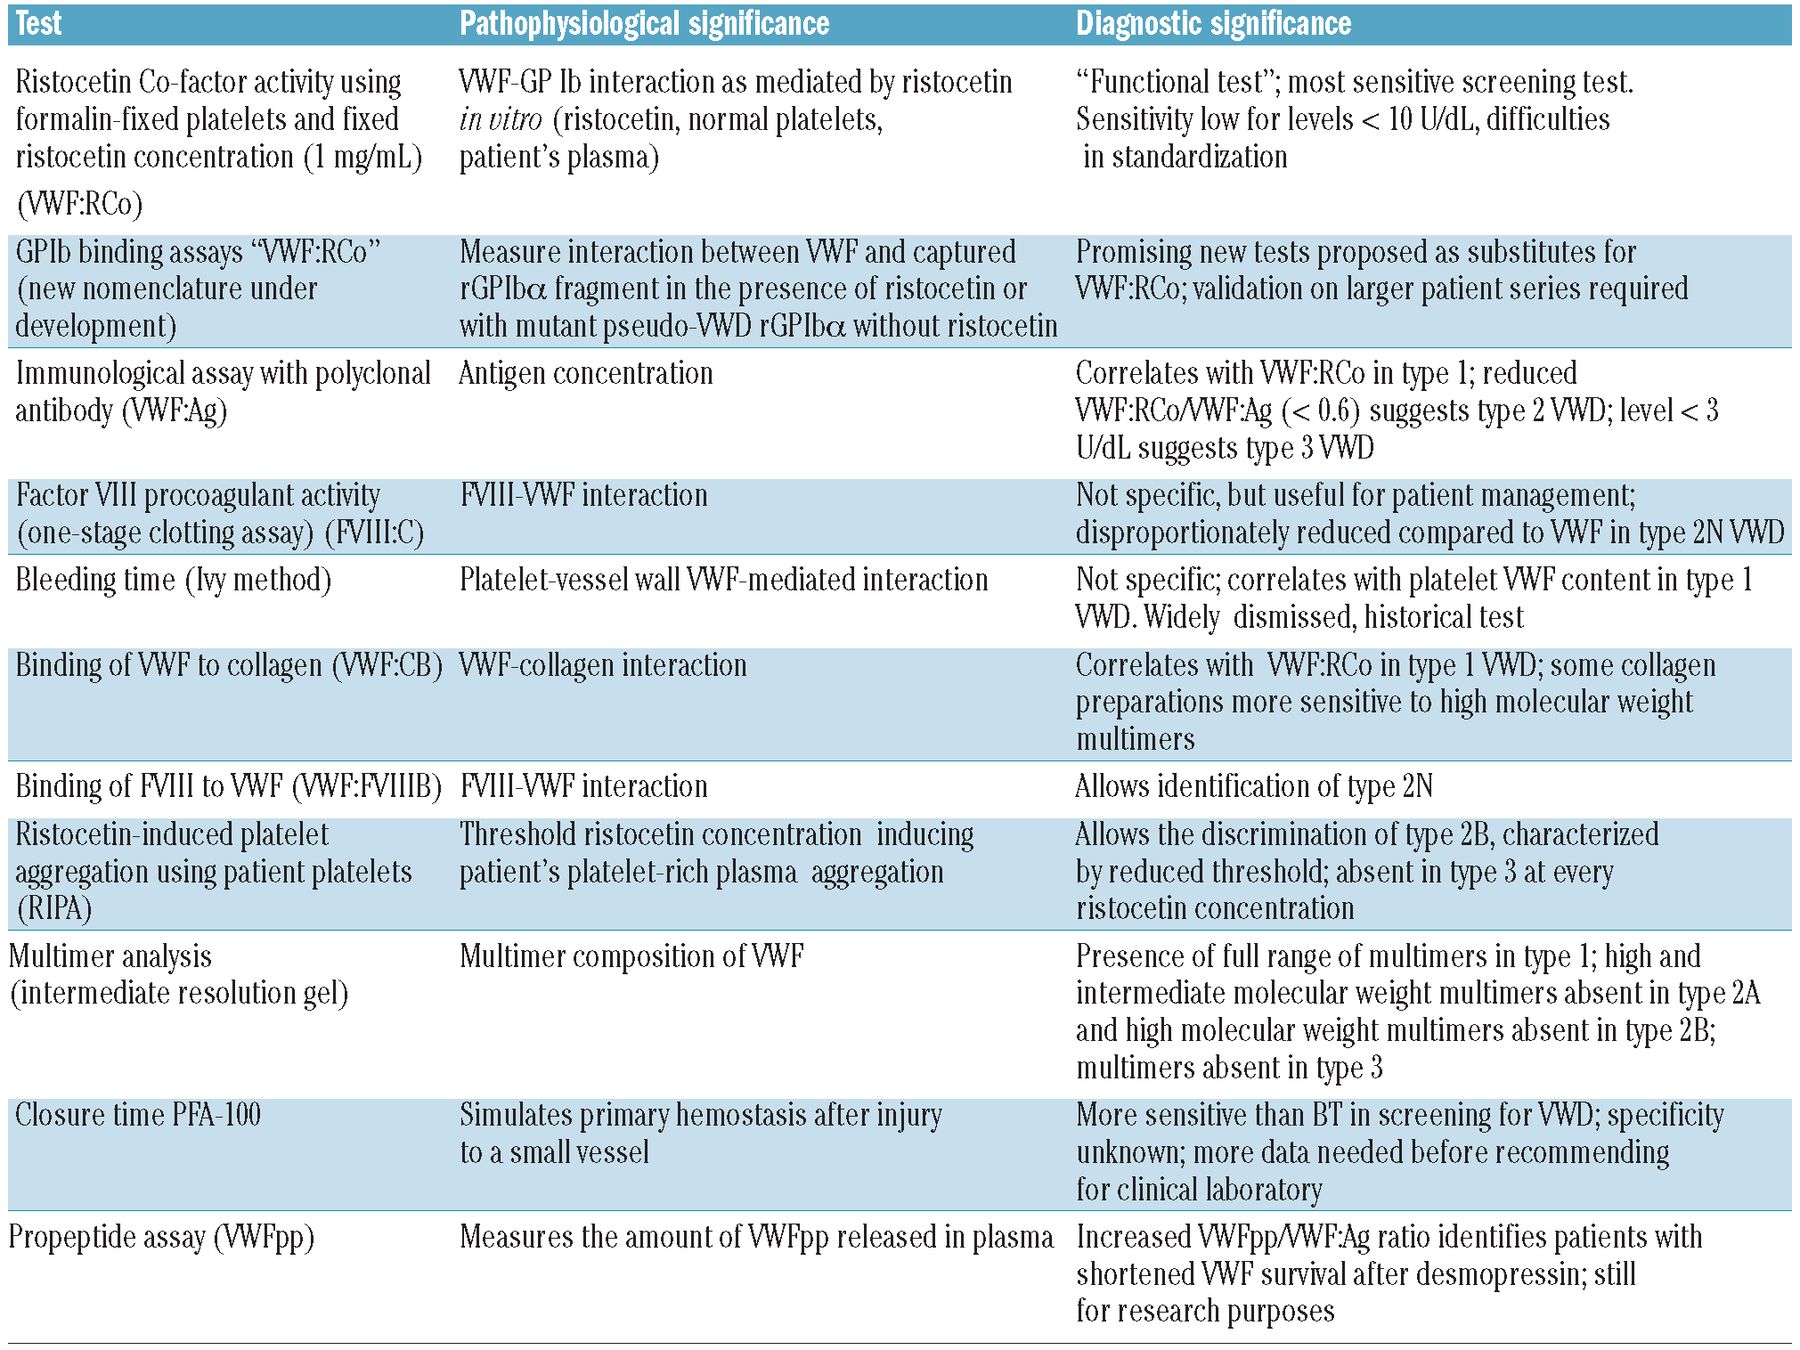 Principles Of Care For The Diagnosis And Treatment Of Von Willebrand Disease Haematologica